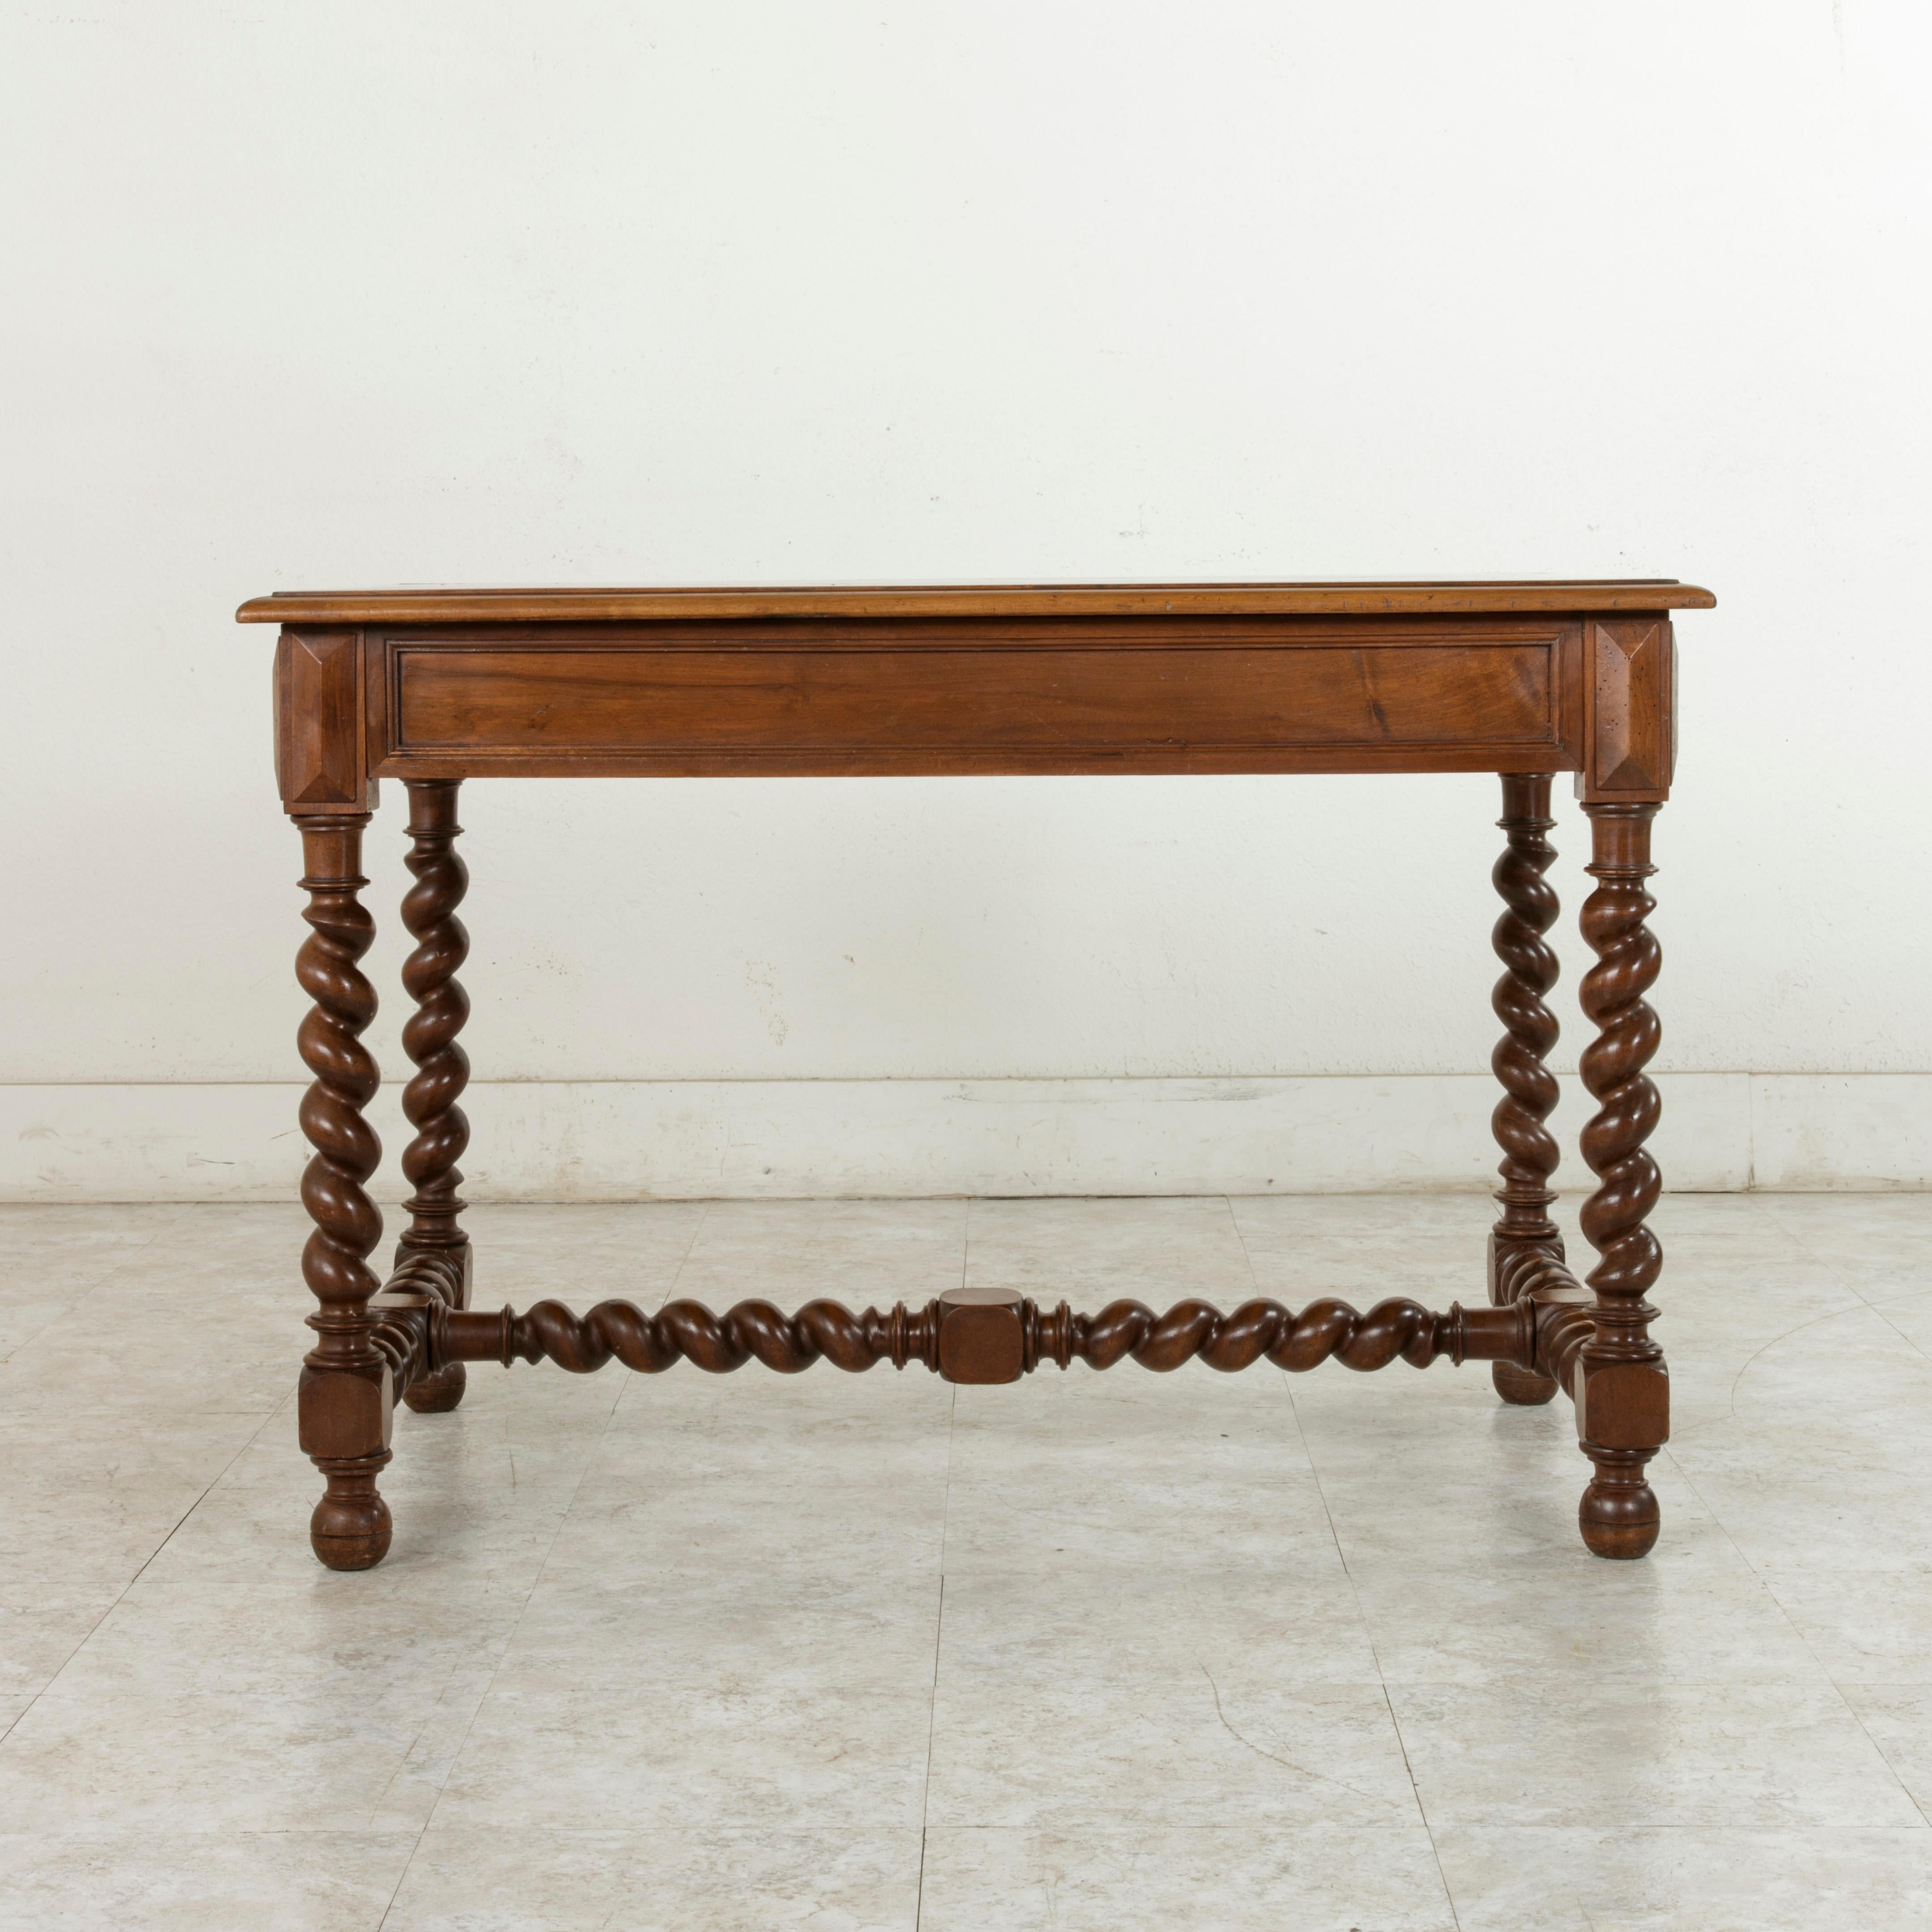 This French Louis XIII style walnut writing table or desk from the late 19th century features a beveled top supported by barley twist legs that rest on ball feet. A barley twist H-stretcher extends between the legs for additional stability. The